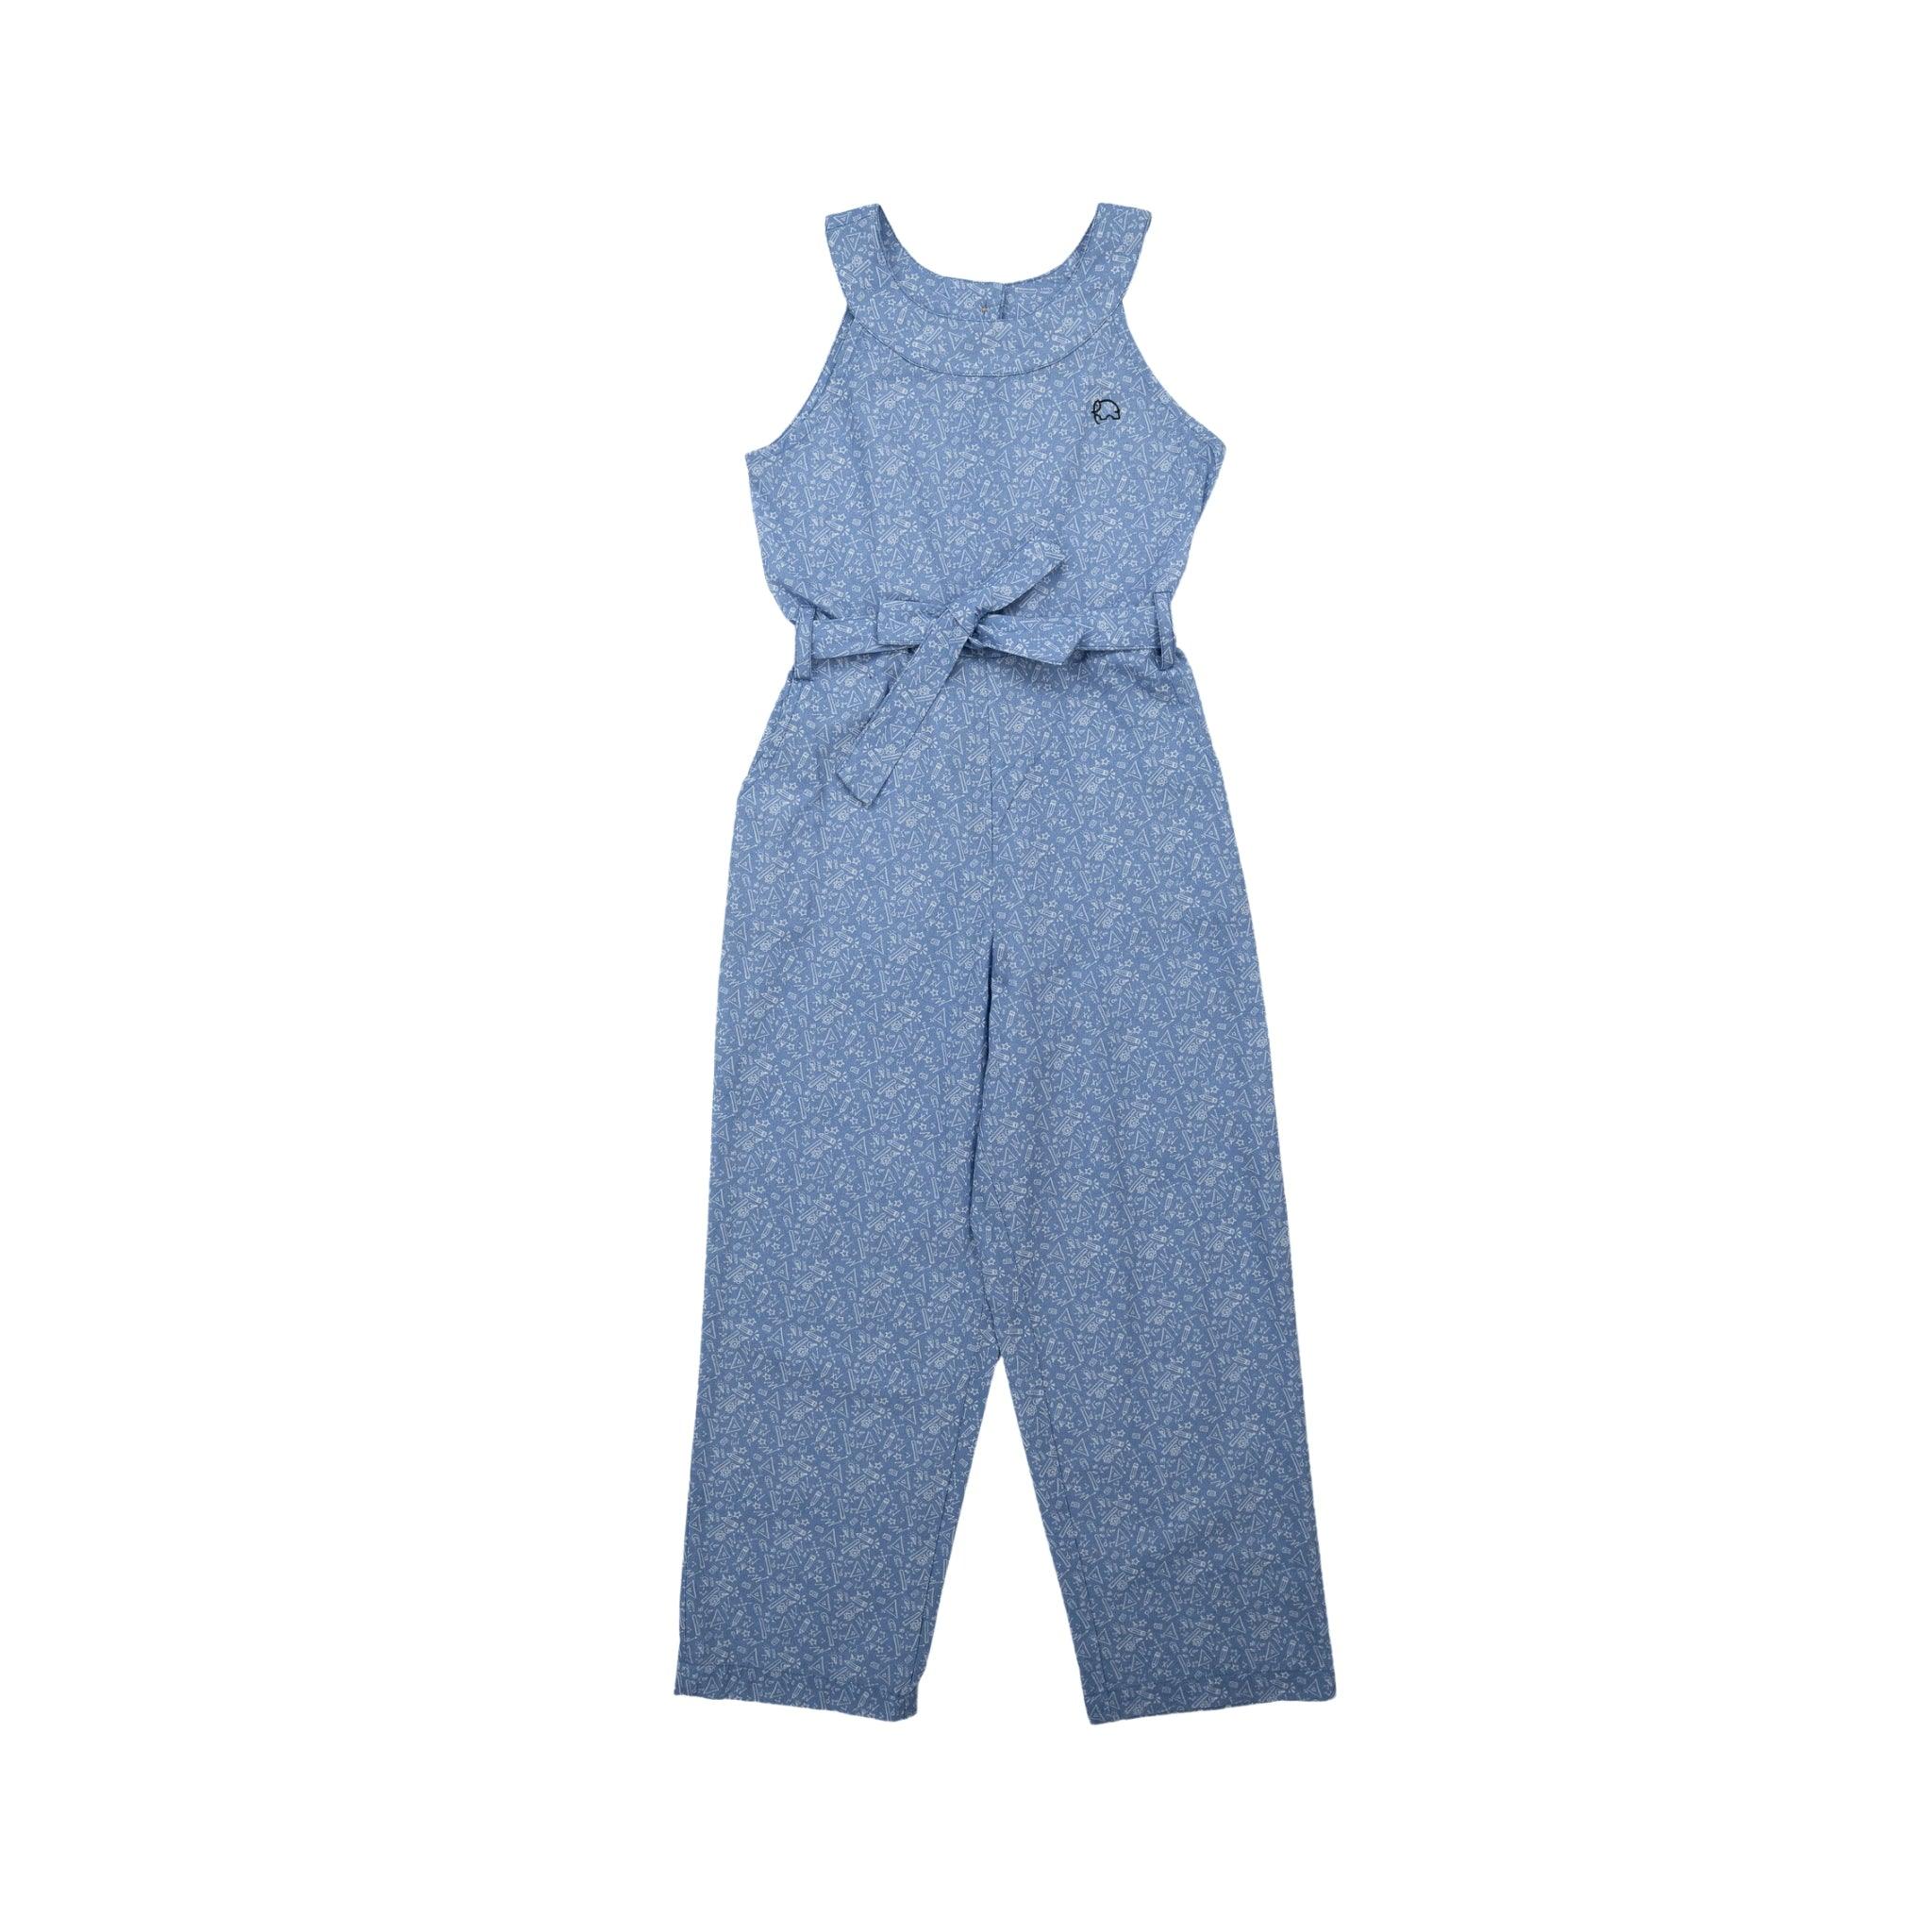 Karee's Purple Impression Cotton Jumpsuit for kids with a ruffle detail at the waist, isolated on a white background.